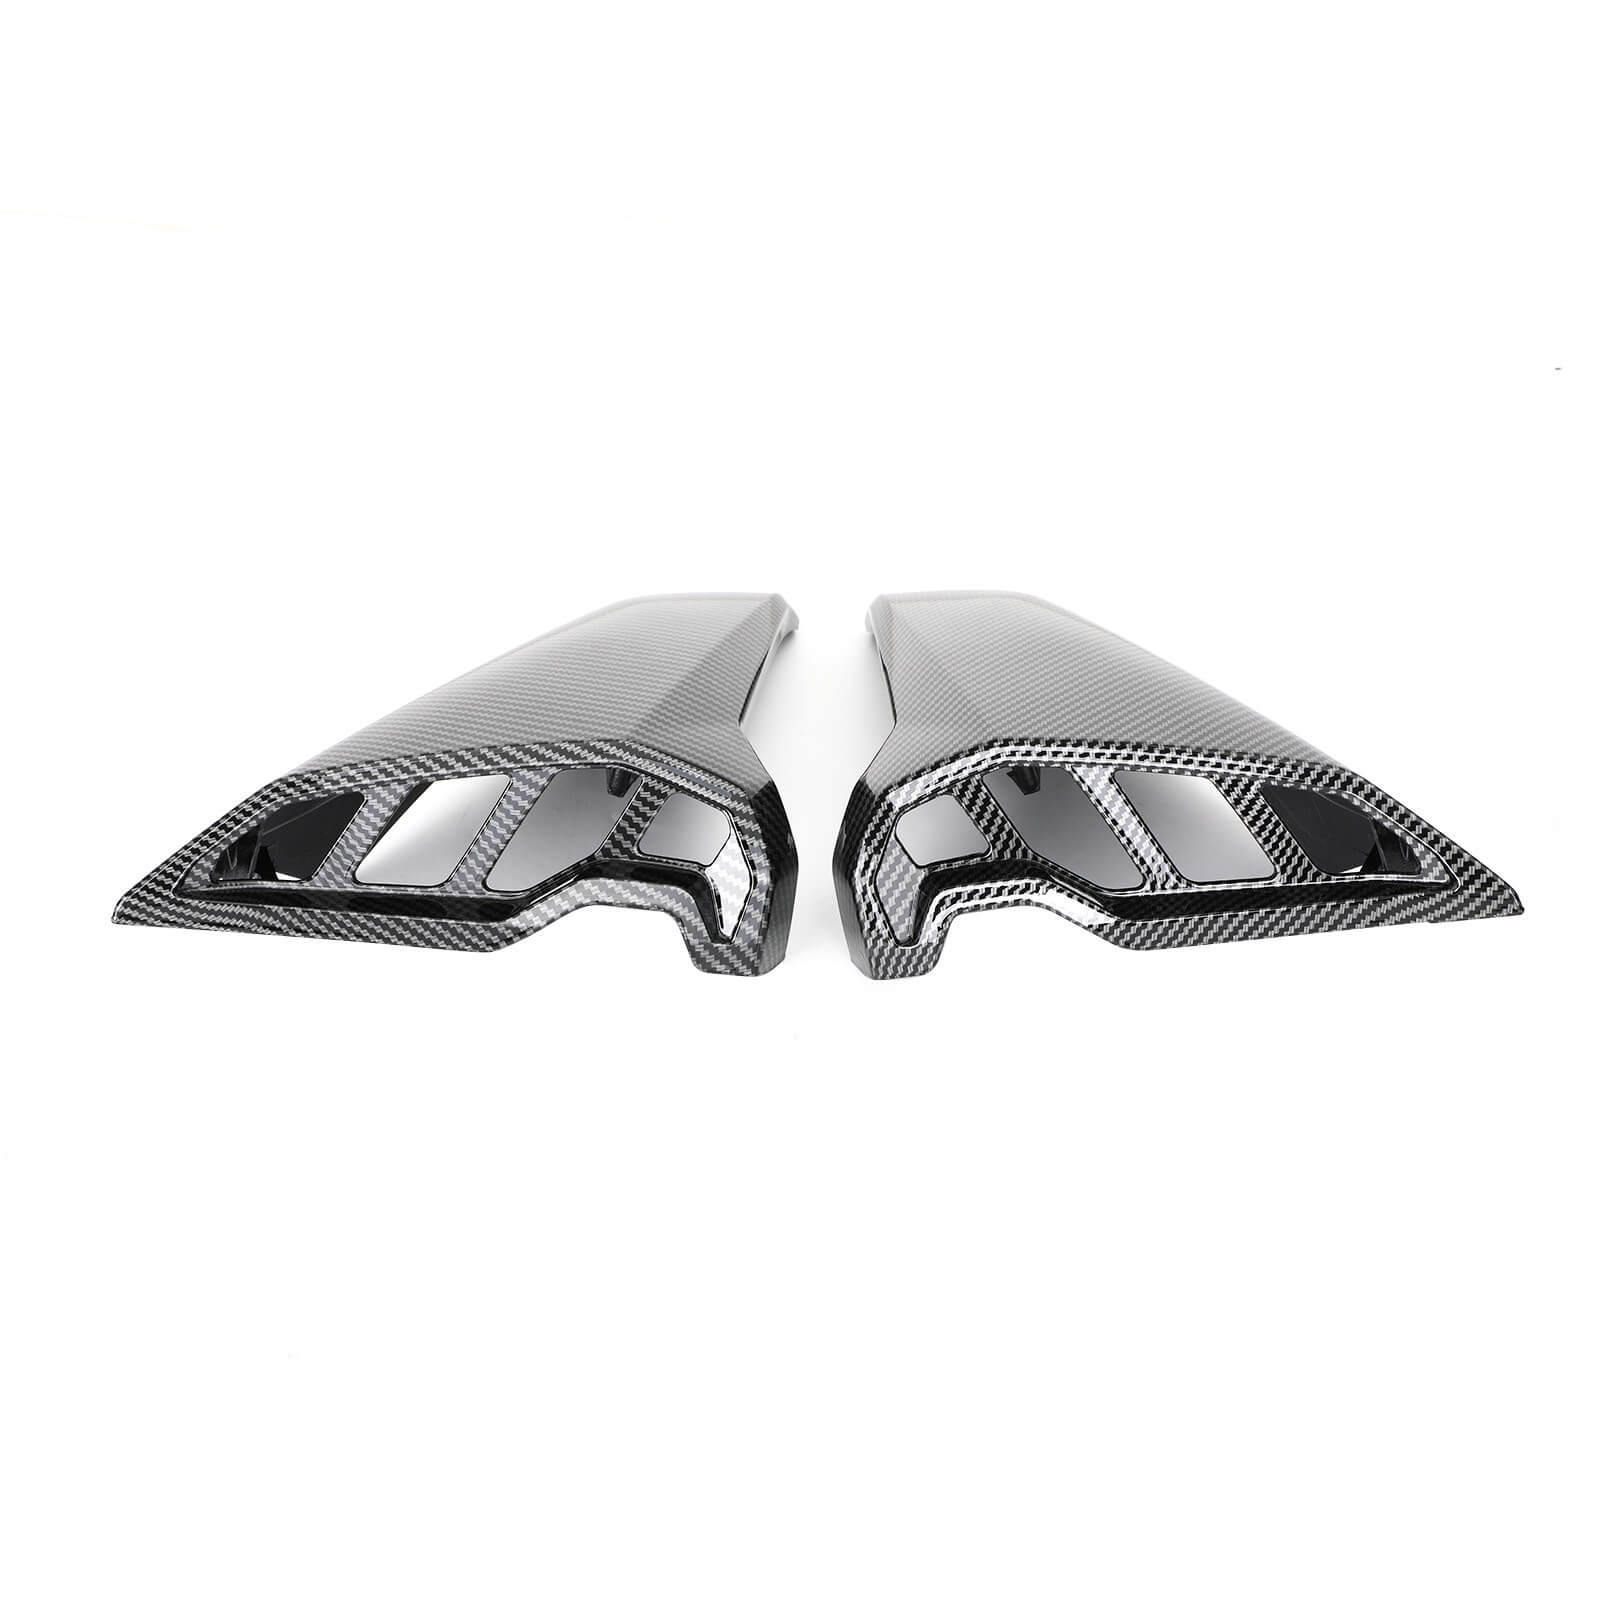 Air Intake Inlet Ram Tube Scoop Covers Fit for Yamaha MT09 MT-09 FZ09 FZ-09 2017-2020 Carbon